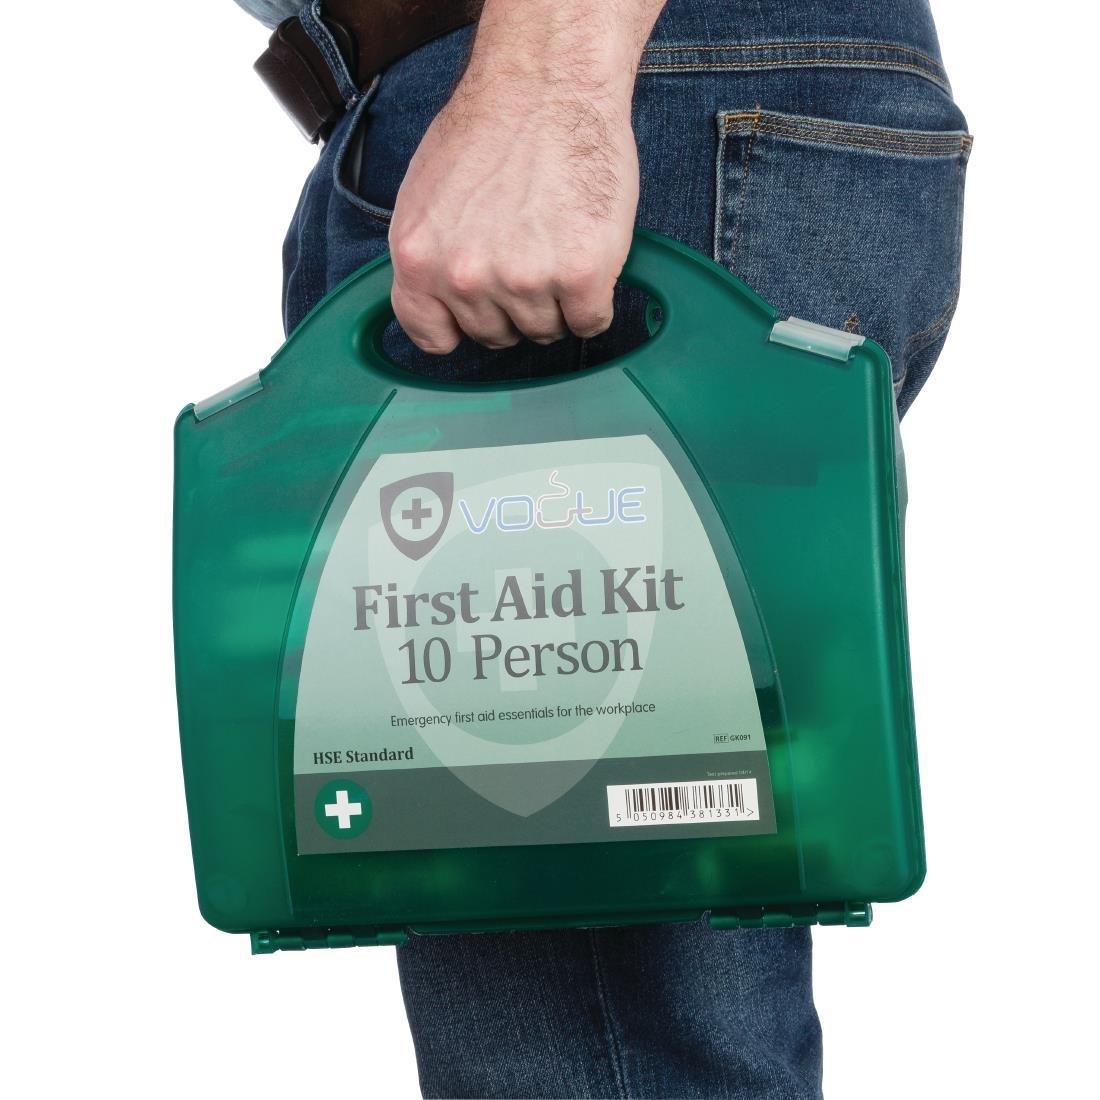 Vogue HSE First Aid Kit 10 person - GK091  - 5